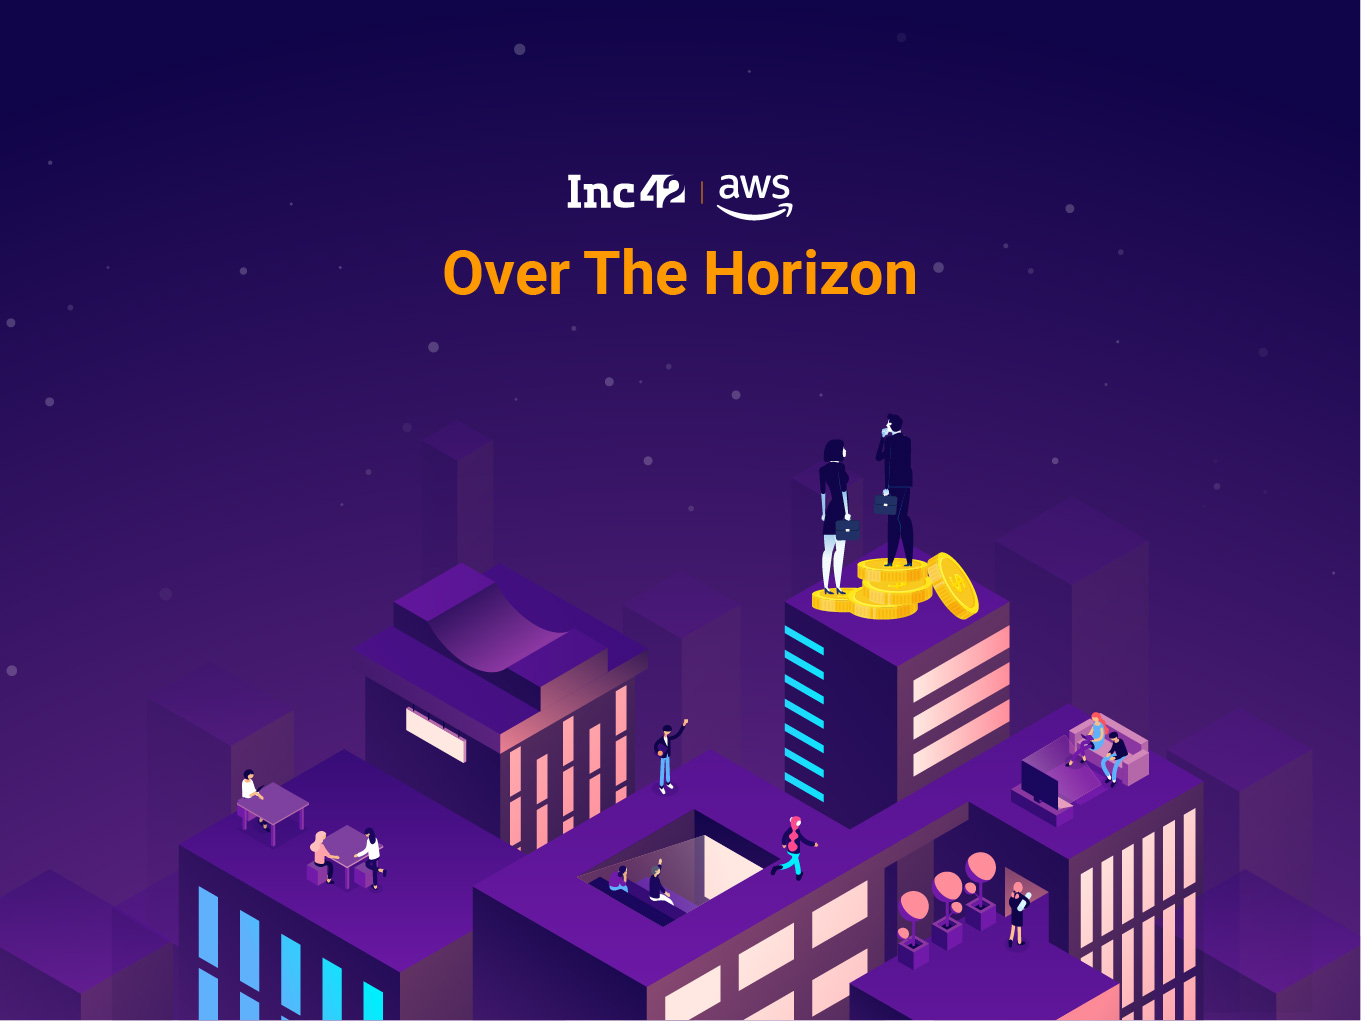 Inc42 and Amazon Launch ‘Over The Horizon’: Turning The Spotlight On India’s Unsung Investors